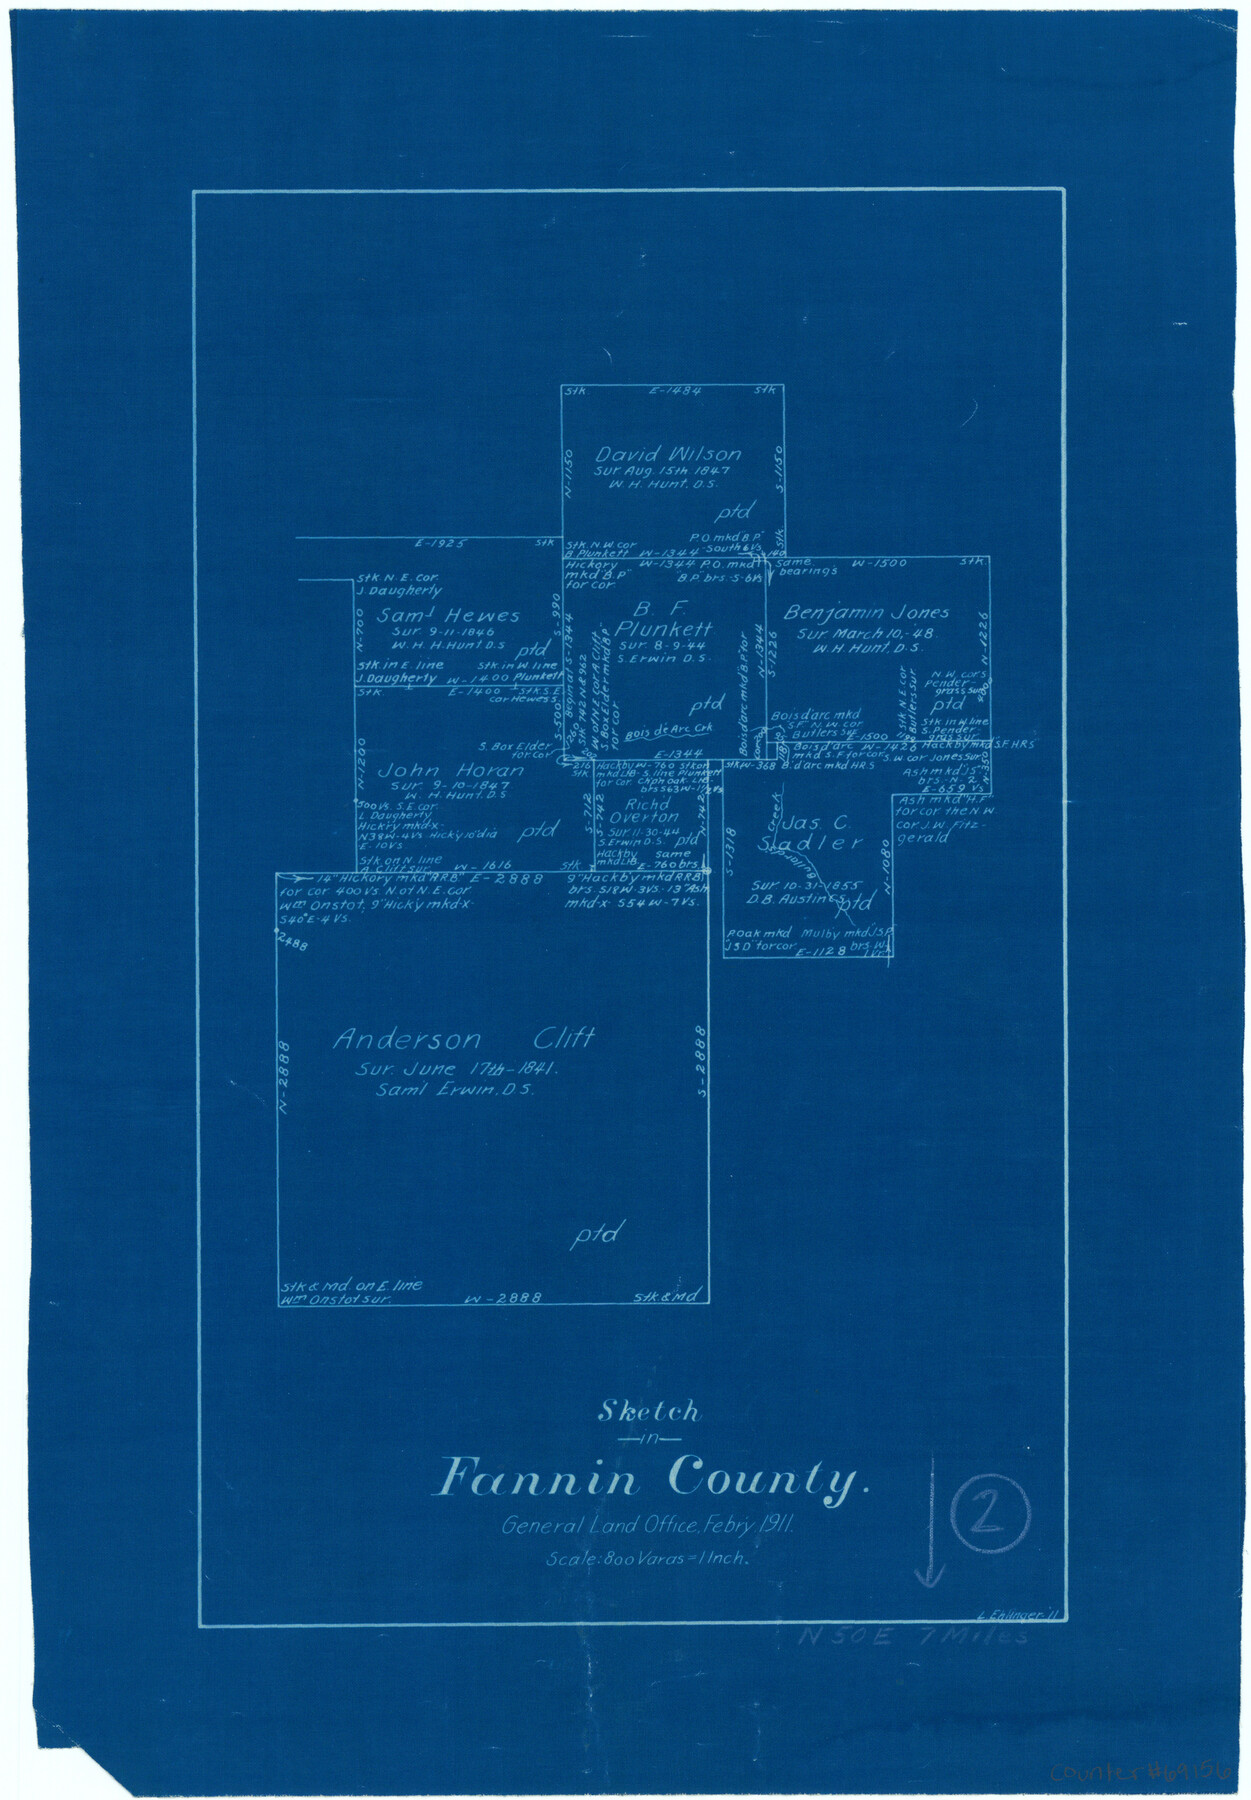 69156, Fannin County Working Sketch 2, General Map Collection